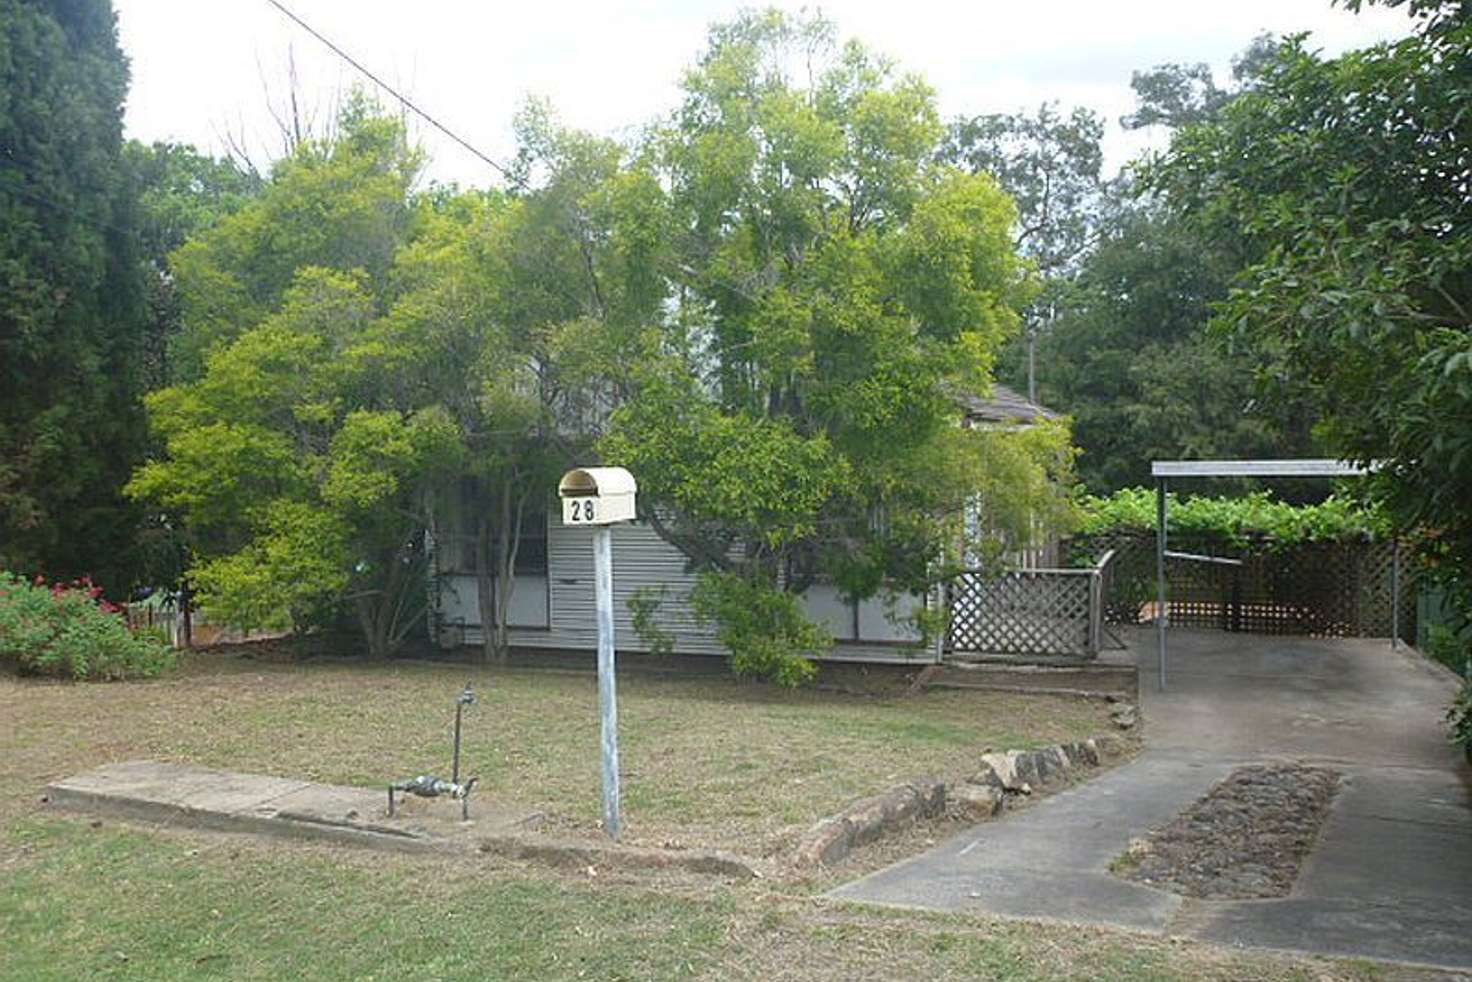 Main view of Homely house listing, 28 Allambie Avenue, Northmead NSW 2152